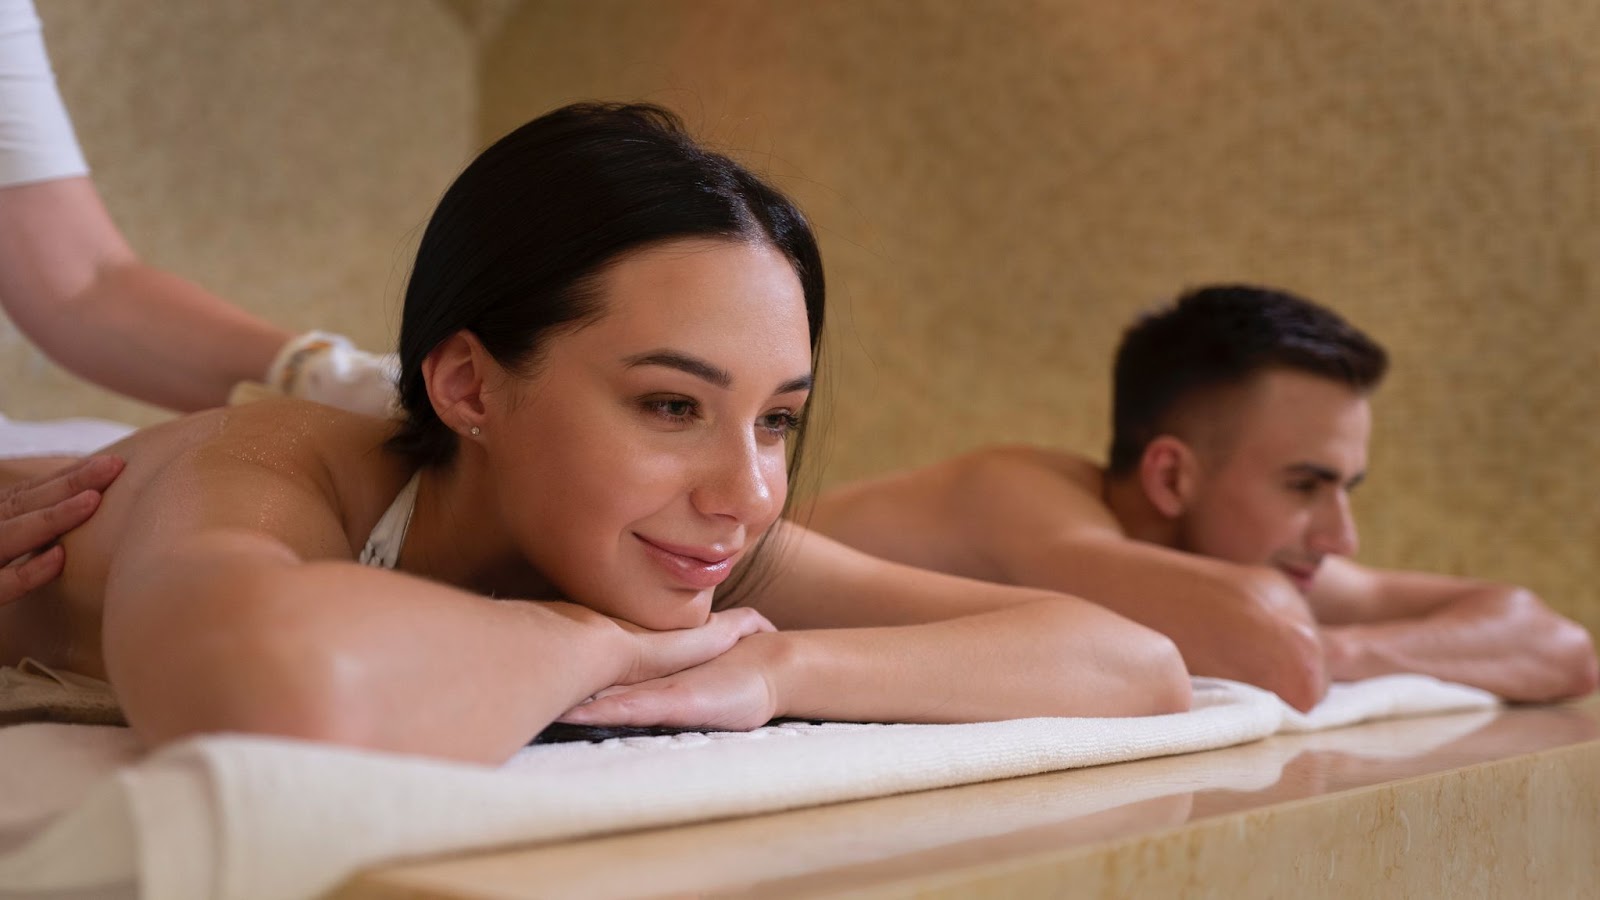 A man and woman receiving a massage